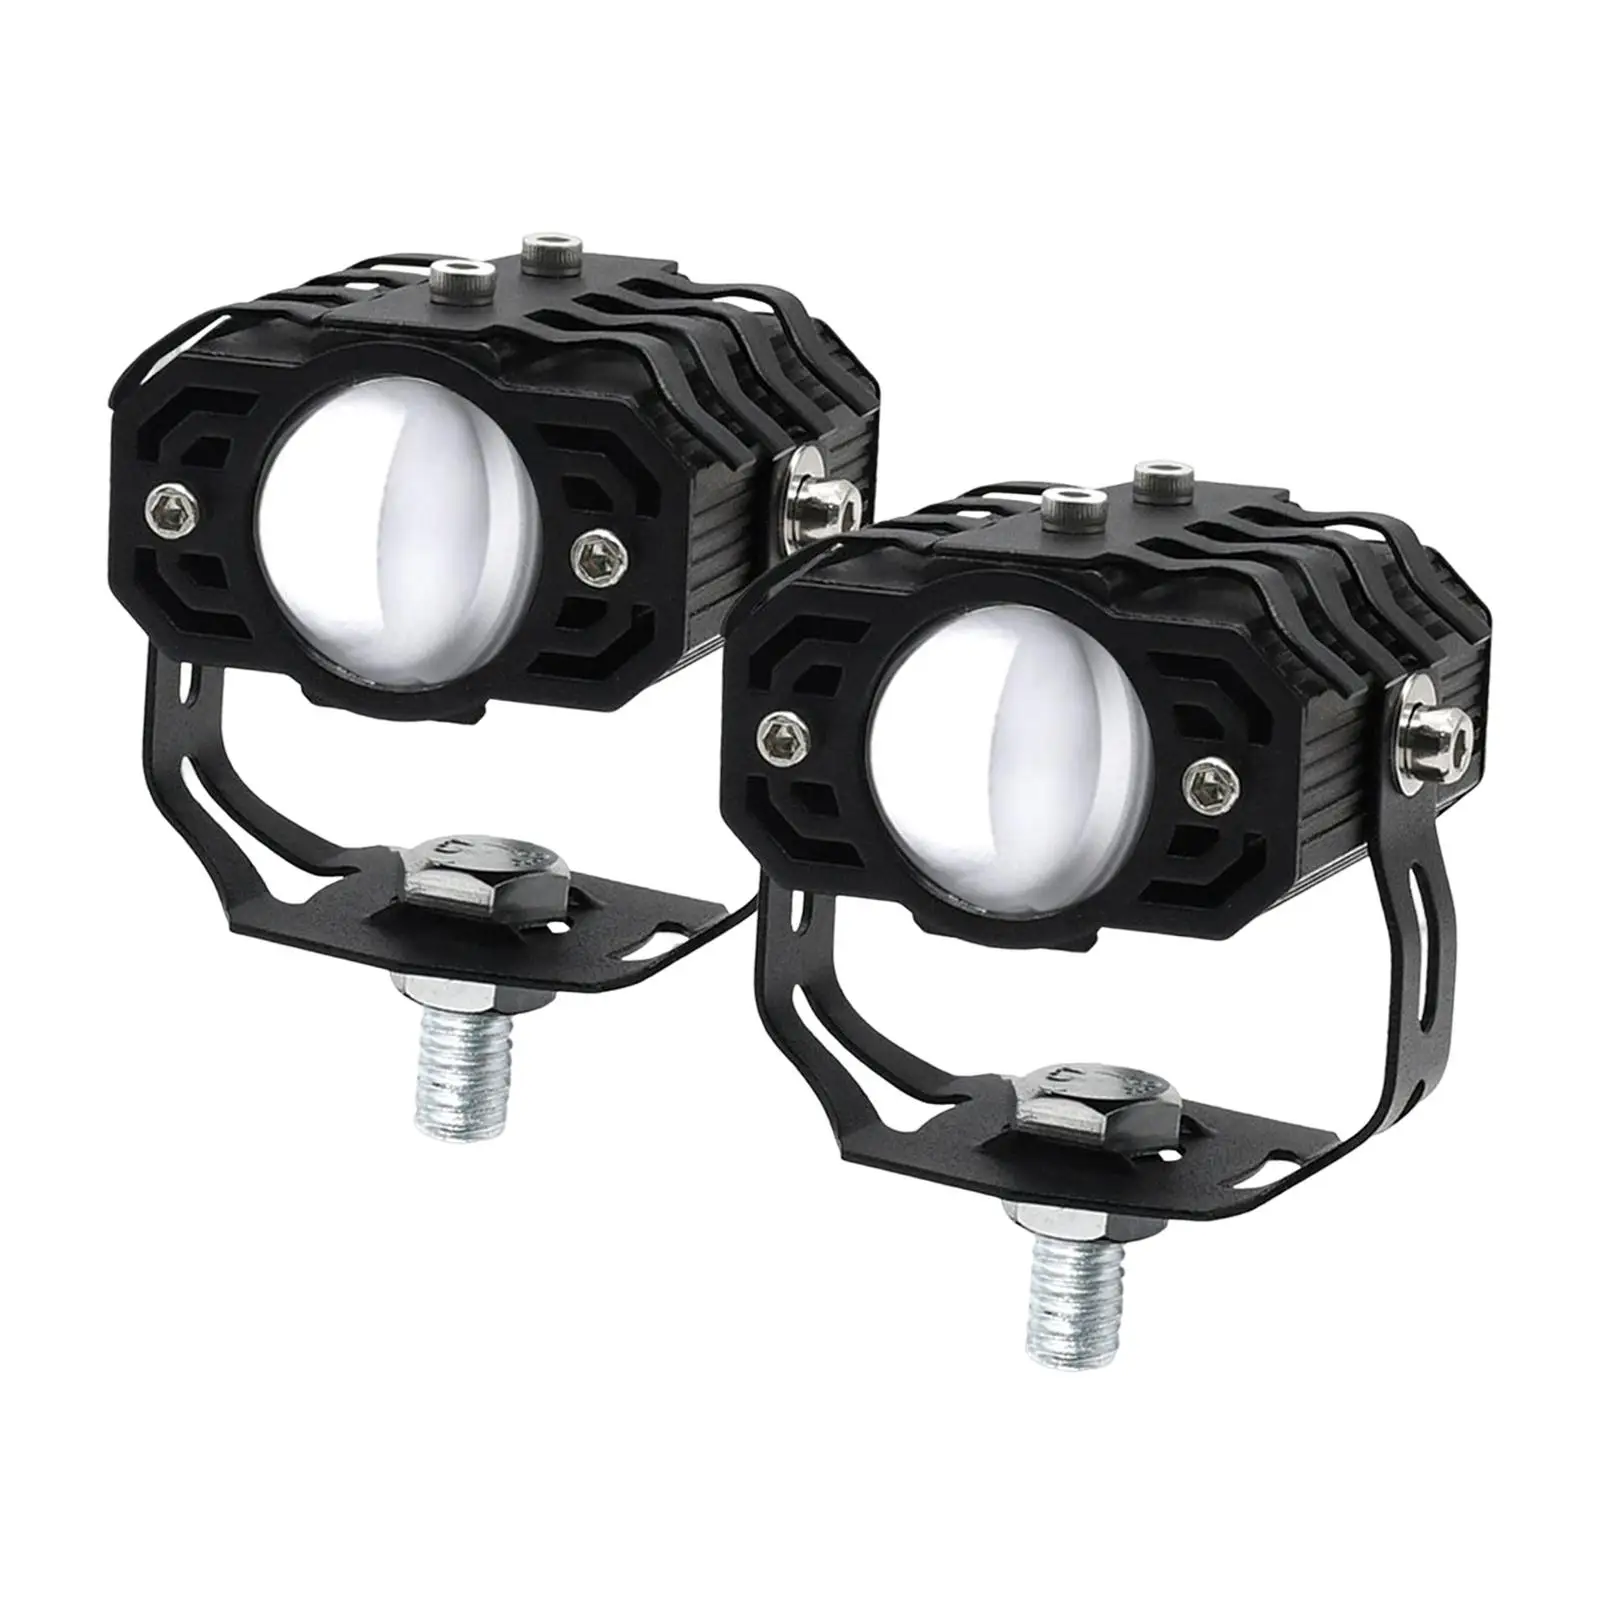 2x Motorcycle Auxiliary Driving Lights Spotlight LED Headlight for ATV